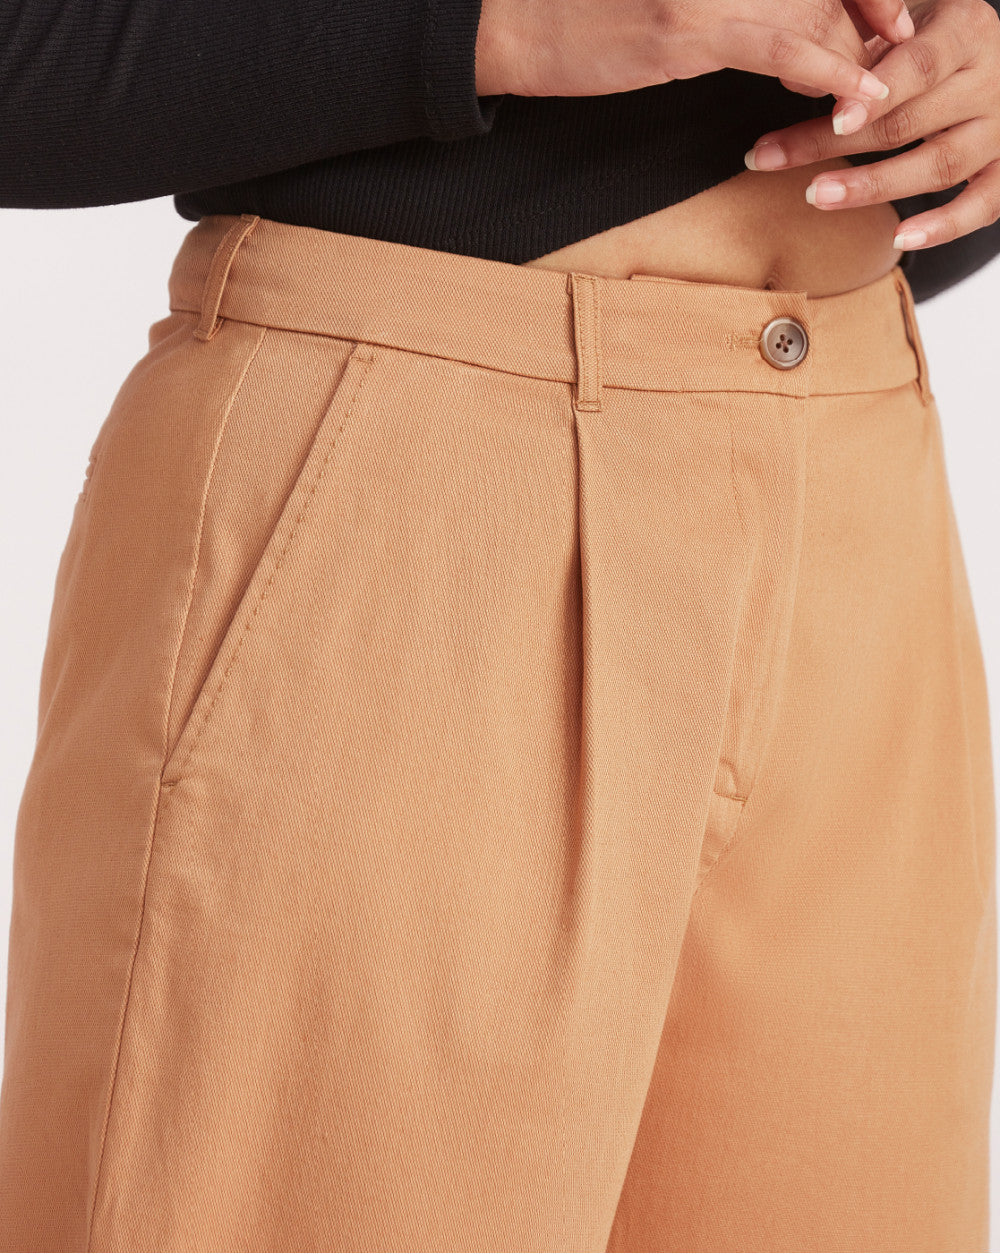 Wide Leg Fit Pleated Pants - Almond Brown